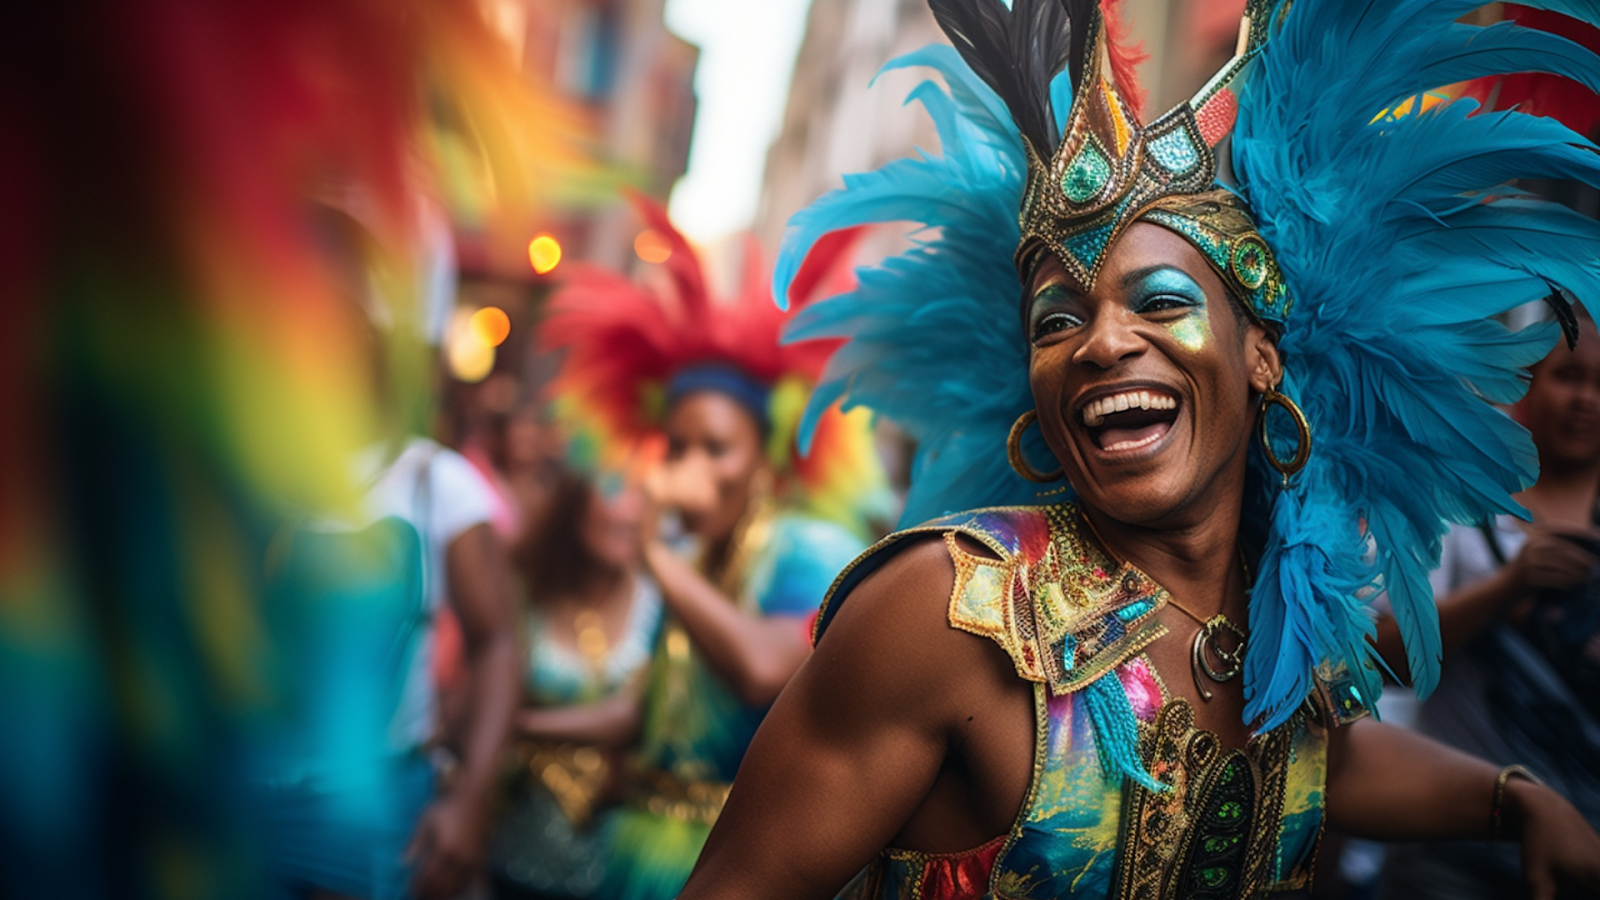 A performer in vibrant Carnival costume laughs heartily, capturing the exuberance of the Brazilian Samba spirit in the streets of Rio.